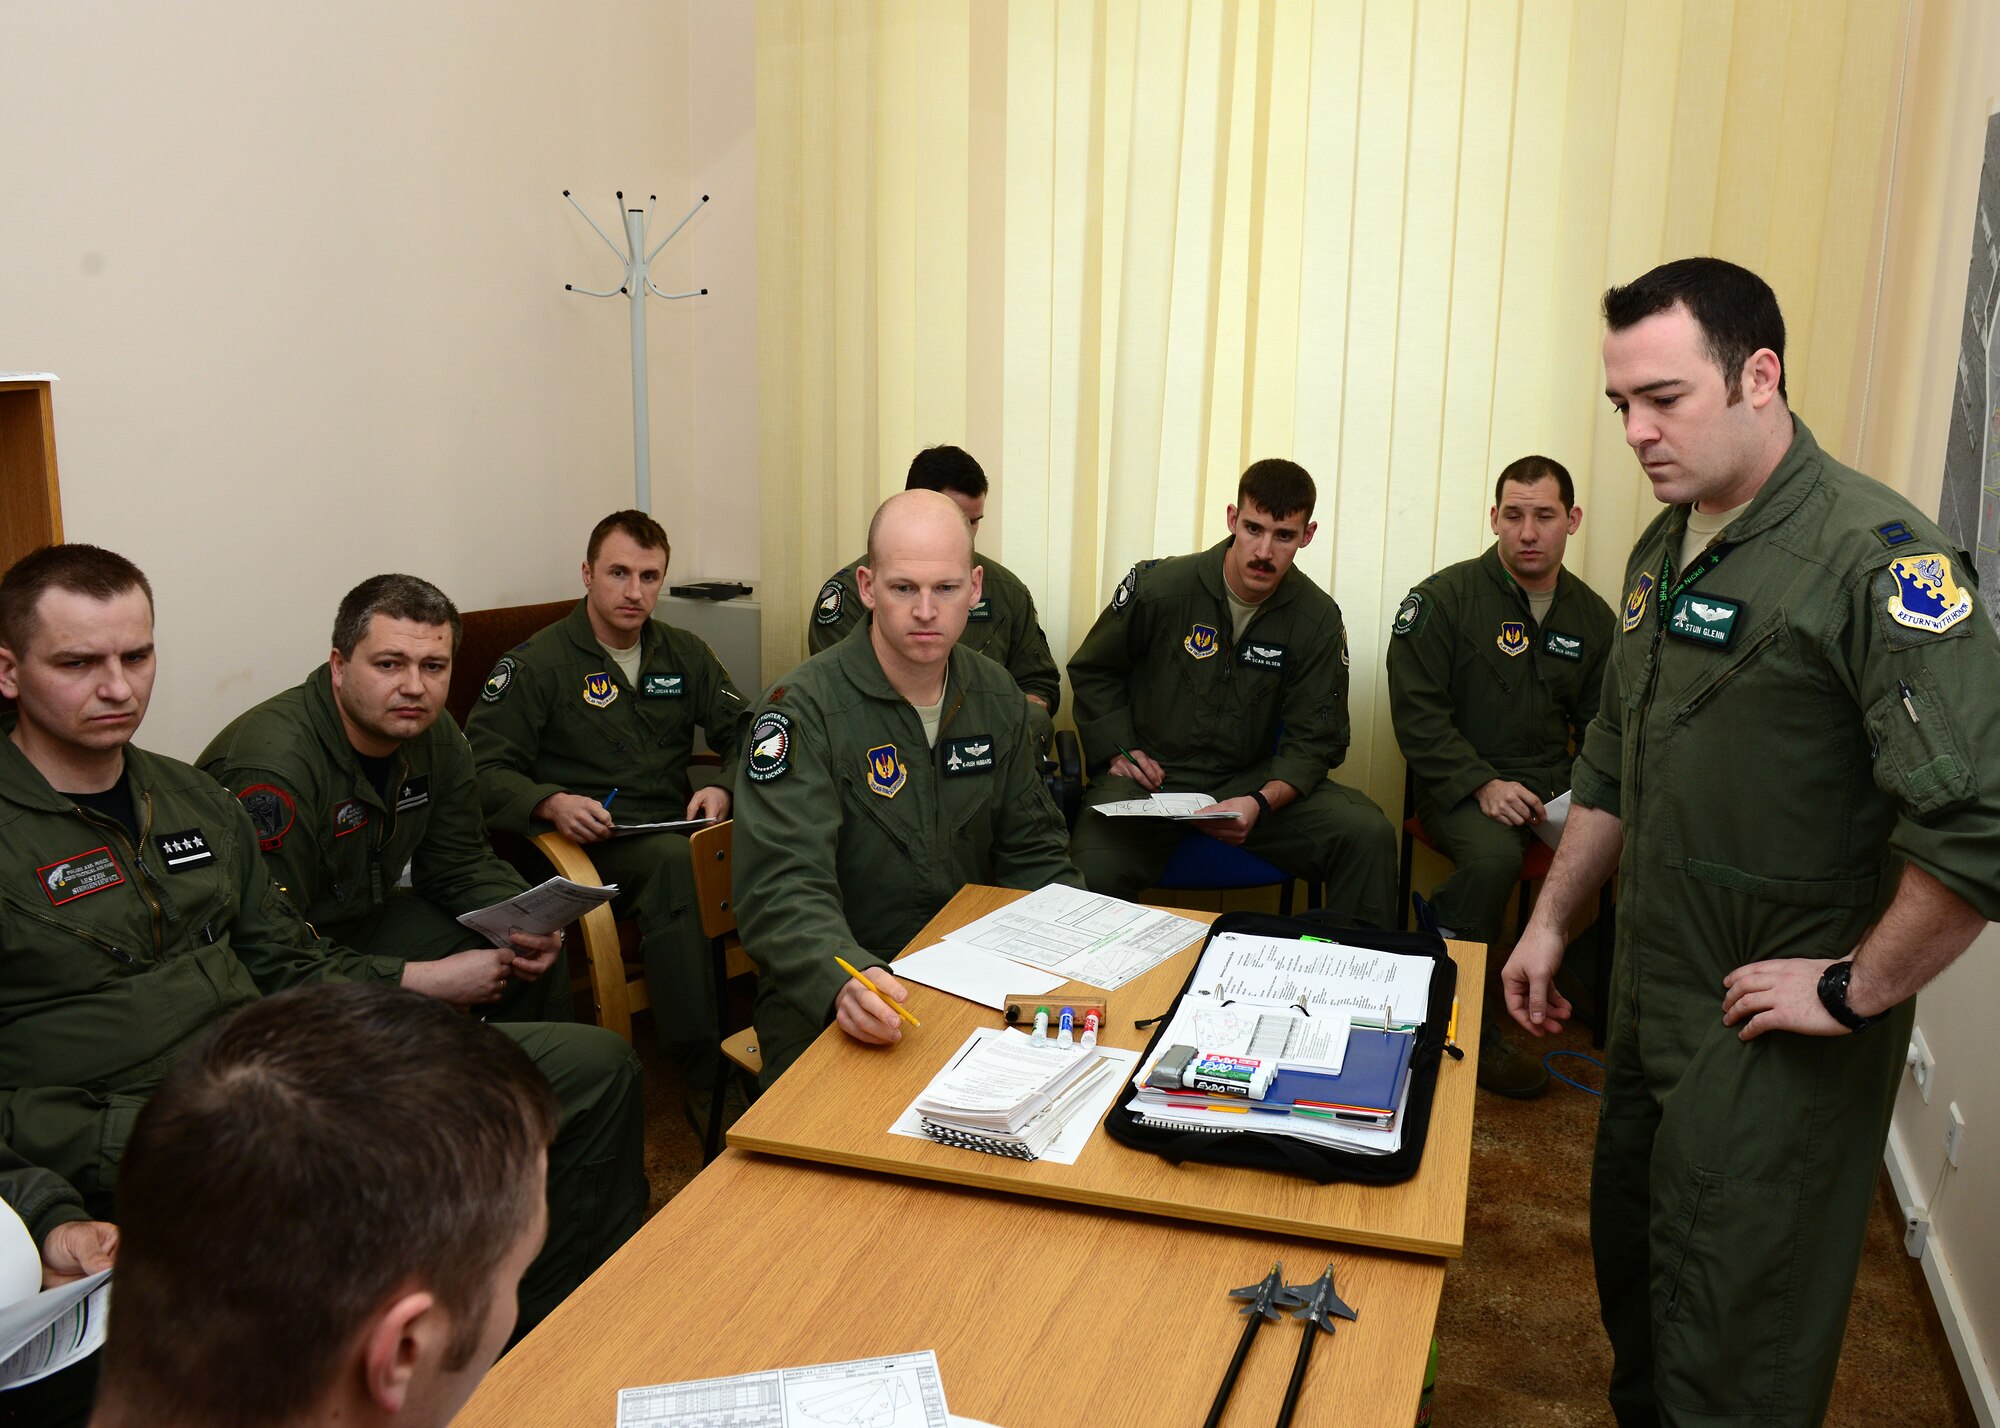 U.S. and Polish pilots listen to a pre-flight briefing, April 1, 2014, prior to their first training sortie together at Łask Air Base, Poland. Some of the training will focus on communication effectiveness and familiarization of techniques to strengthen interoperability with a key NATO ally since the 555th Fighter Squadron from Aviano Air Base, Italy, and the Polish air force’s 10th Tactical Squadron from Łask employ the F-16 Fighting Falcon fighter aircraft. (U.S. Air Force photo/Airman 1st Class Ryan Conroy/Released) 